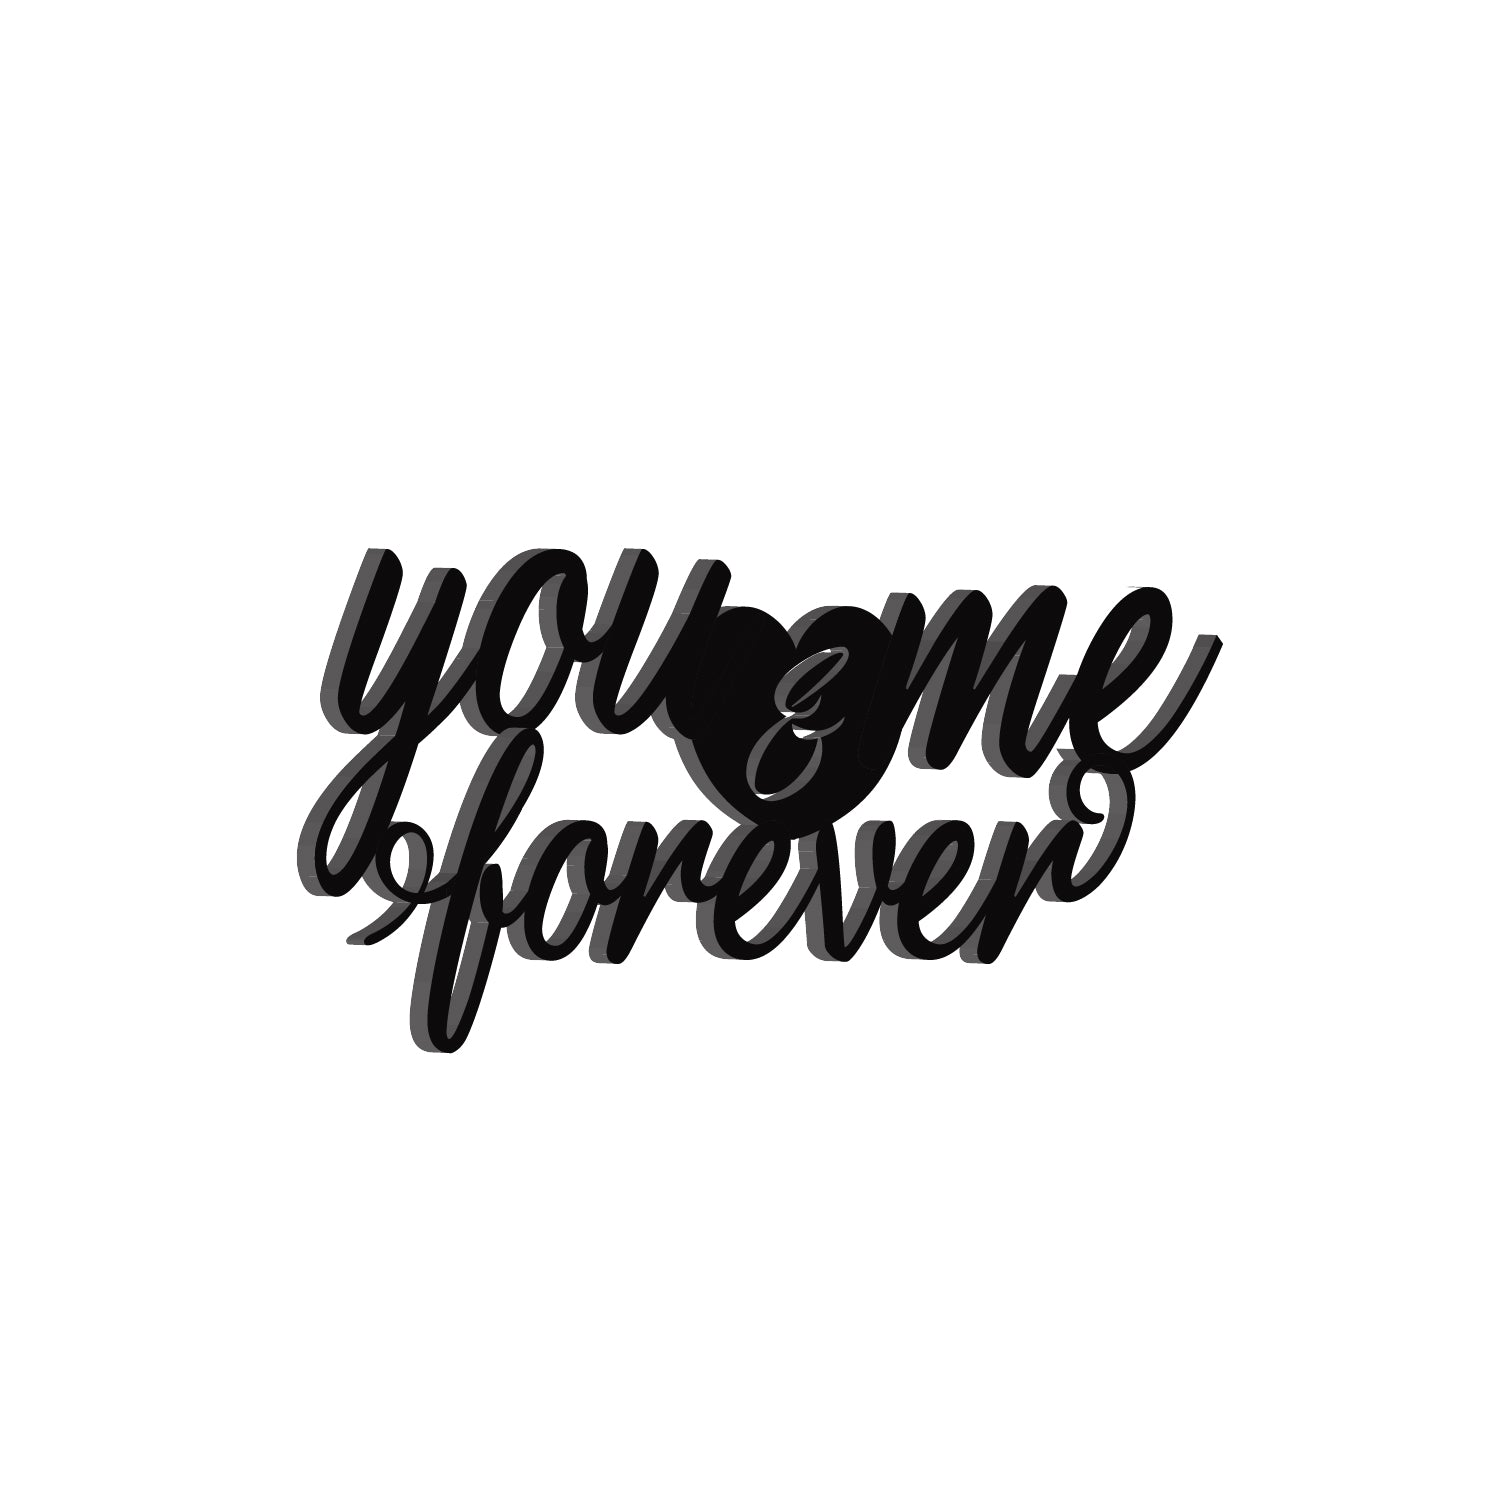 "You & Me Forever" Love Theme Black Engineered Wood Wall Art Cutout, Ready to Hang Home Decor 4